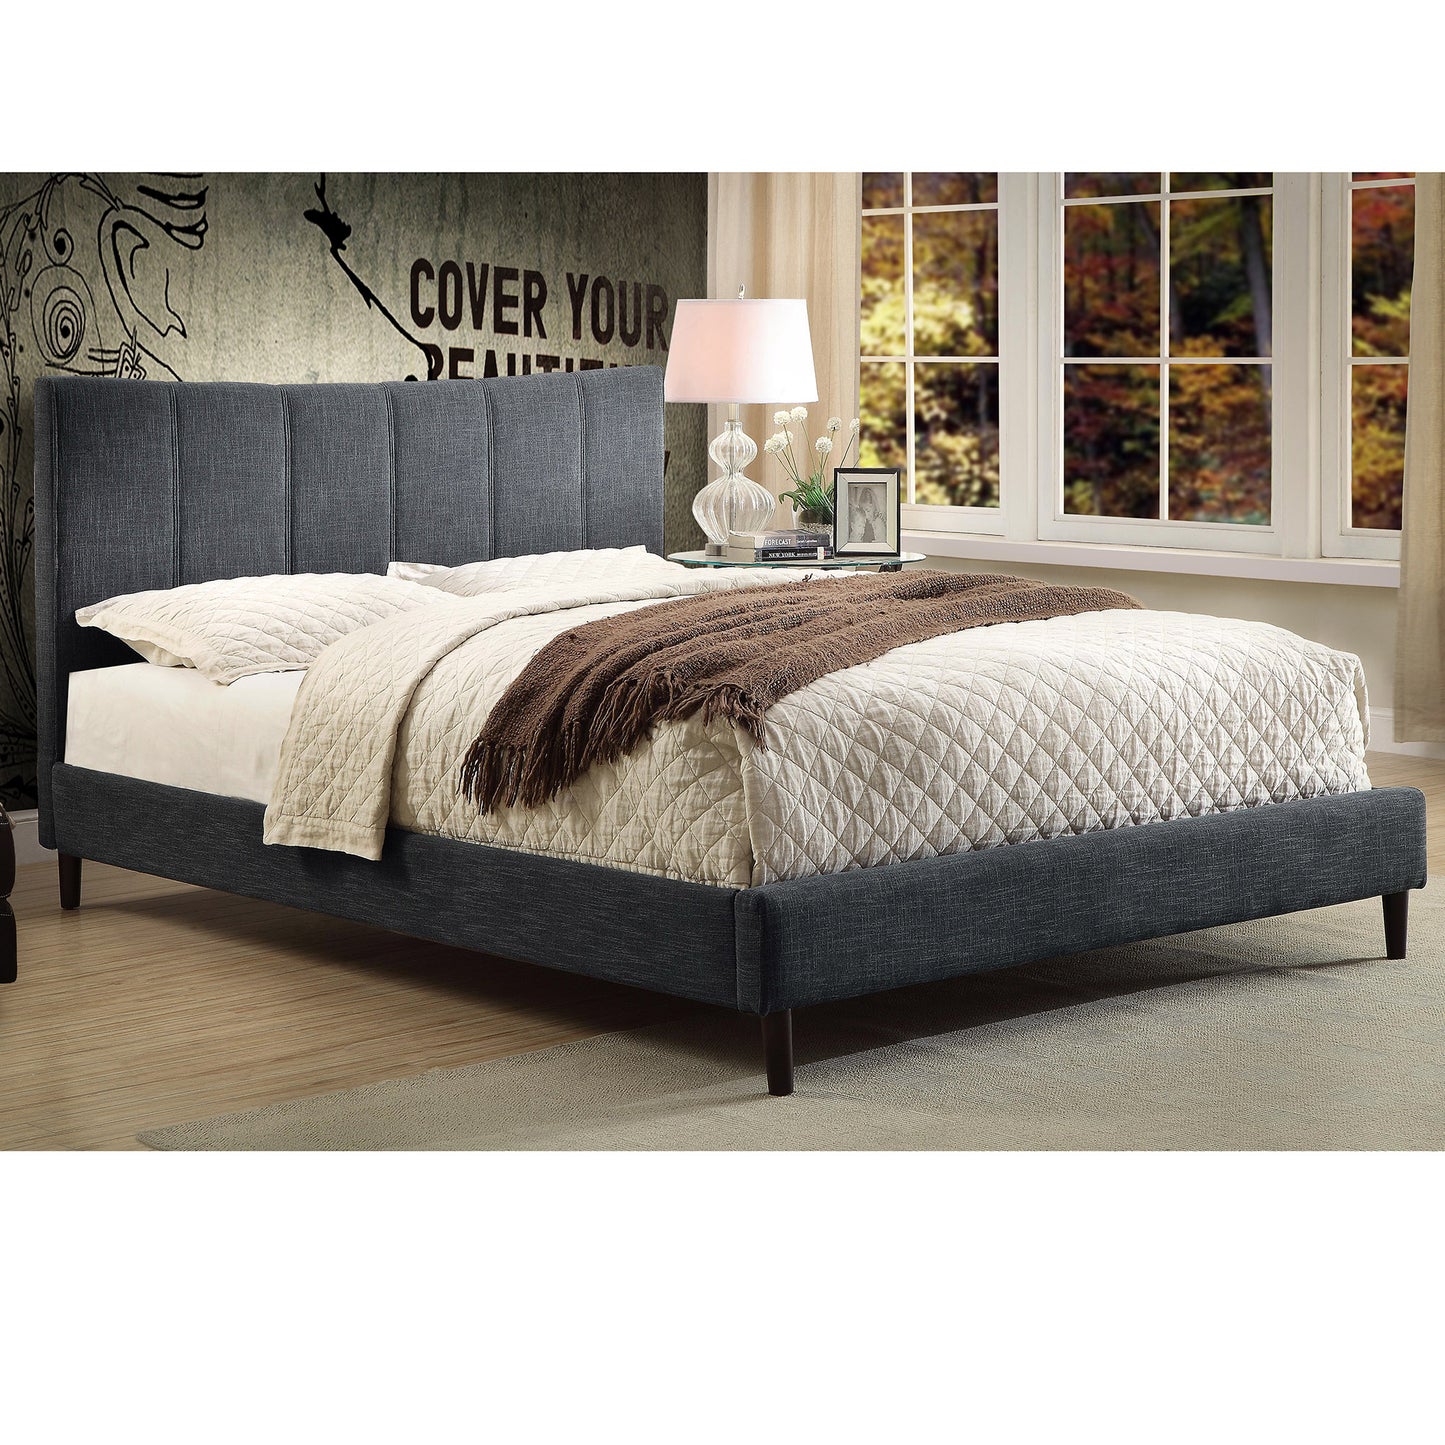 KING SIZE- (RIMO GREY) - LINEN FABRIC - BED FRAME- WITH SLATS